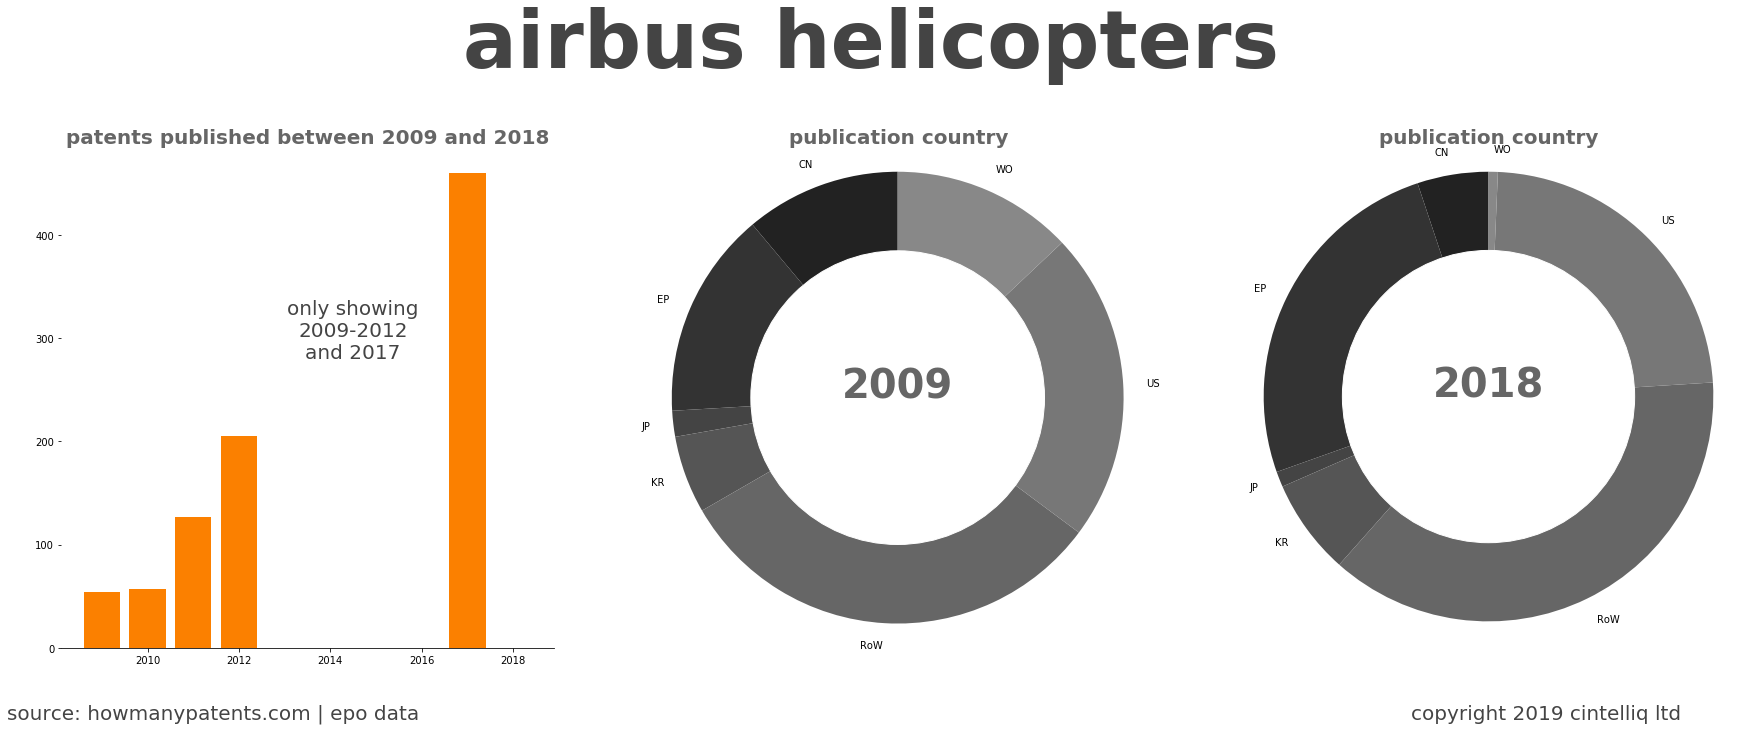 summary of patents for Airbus Helicopters